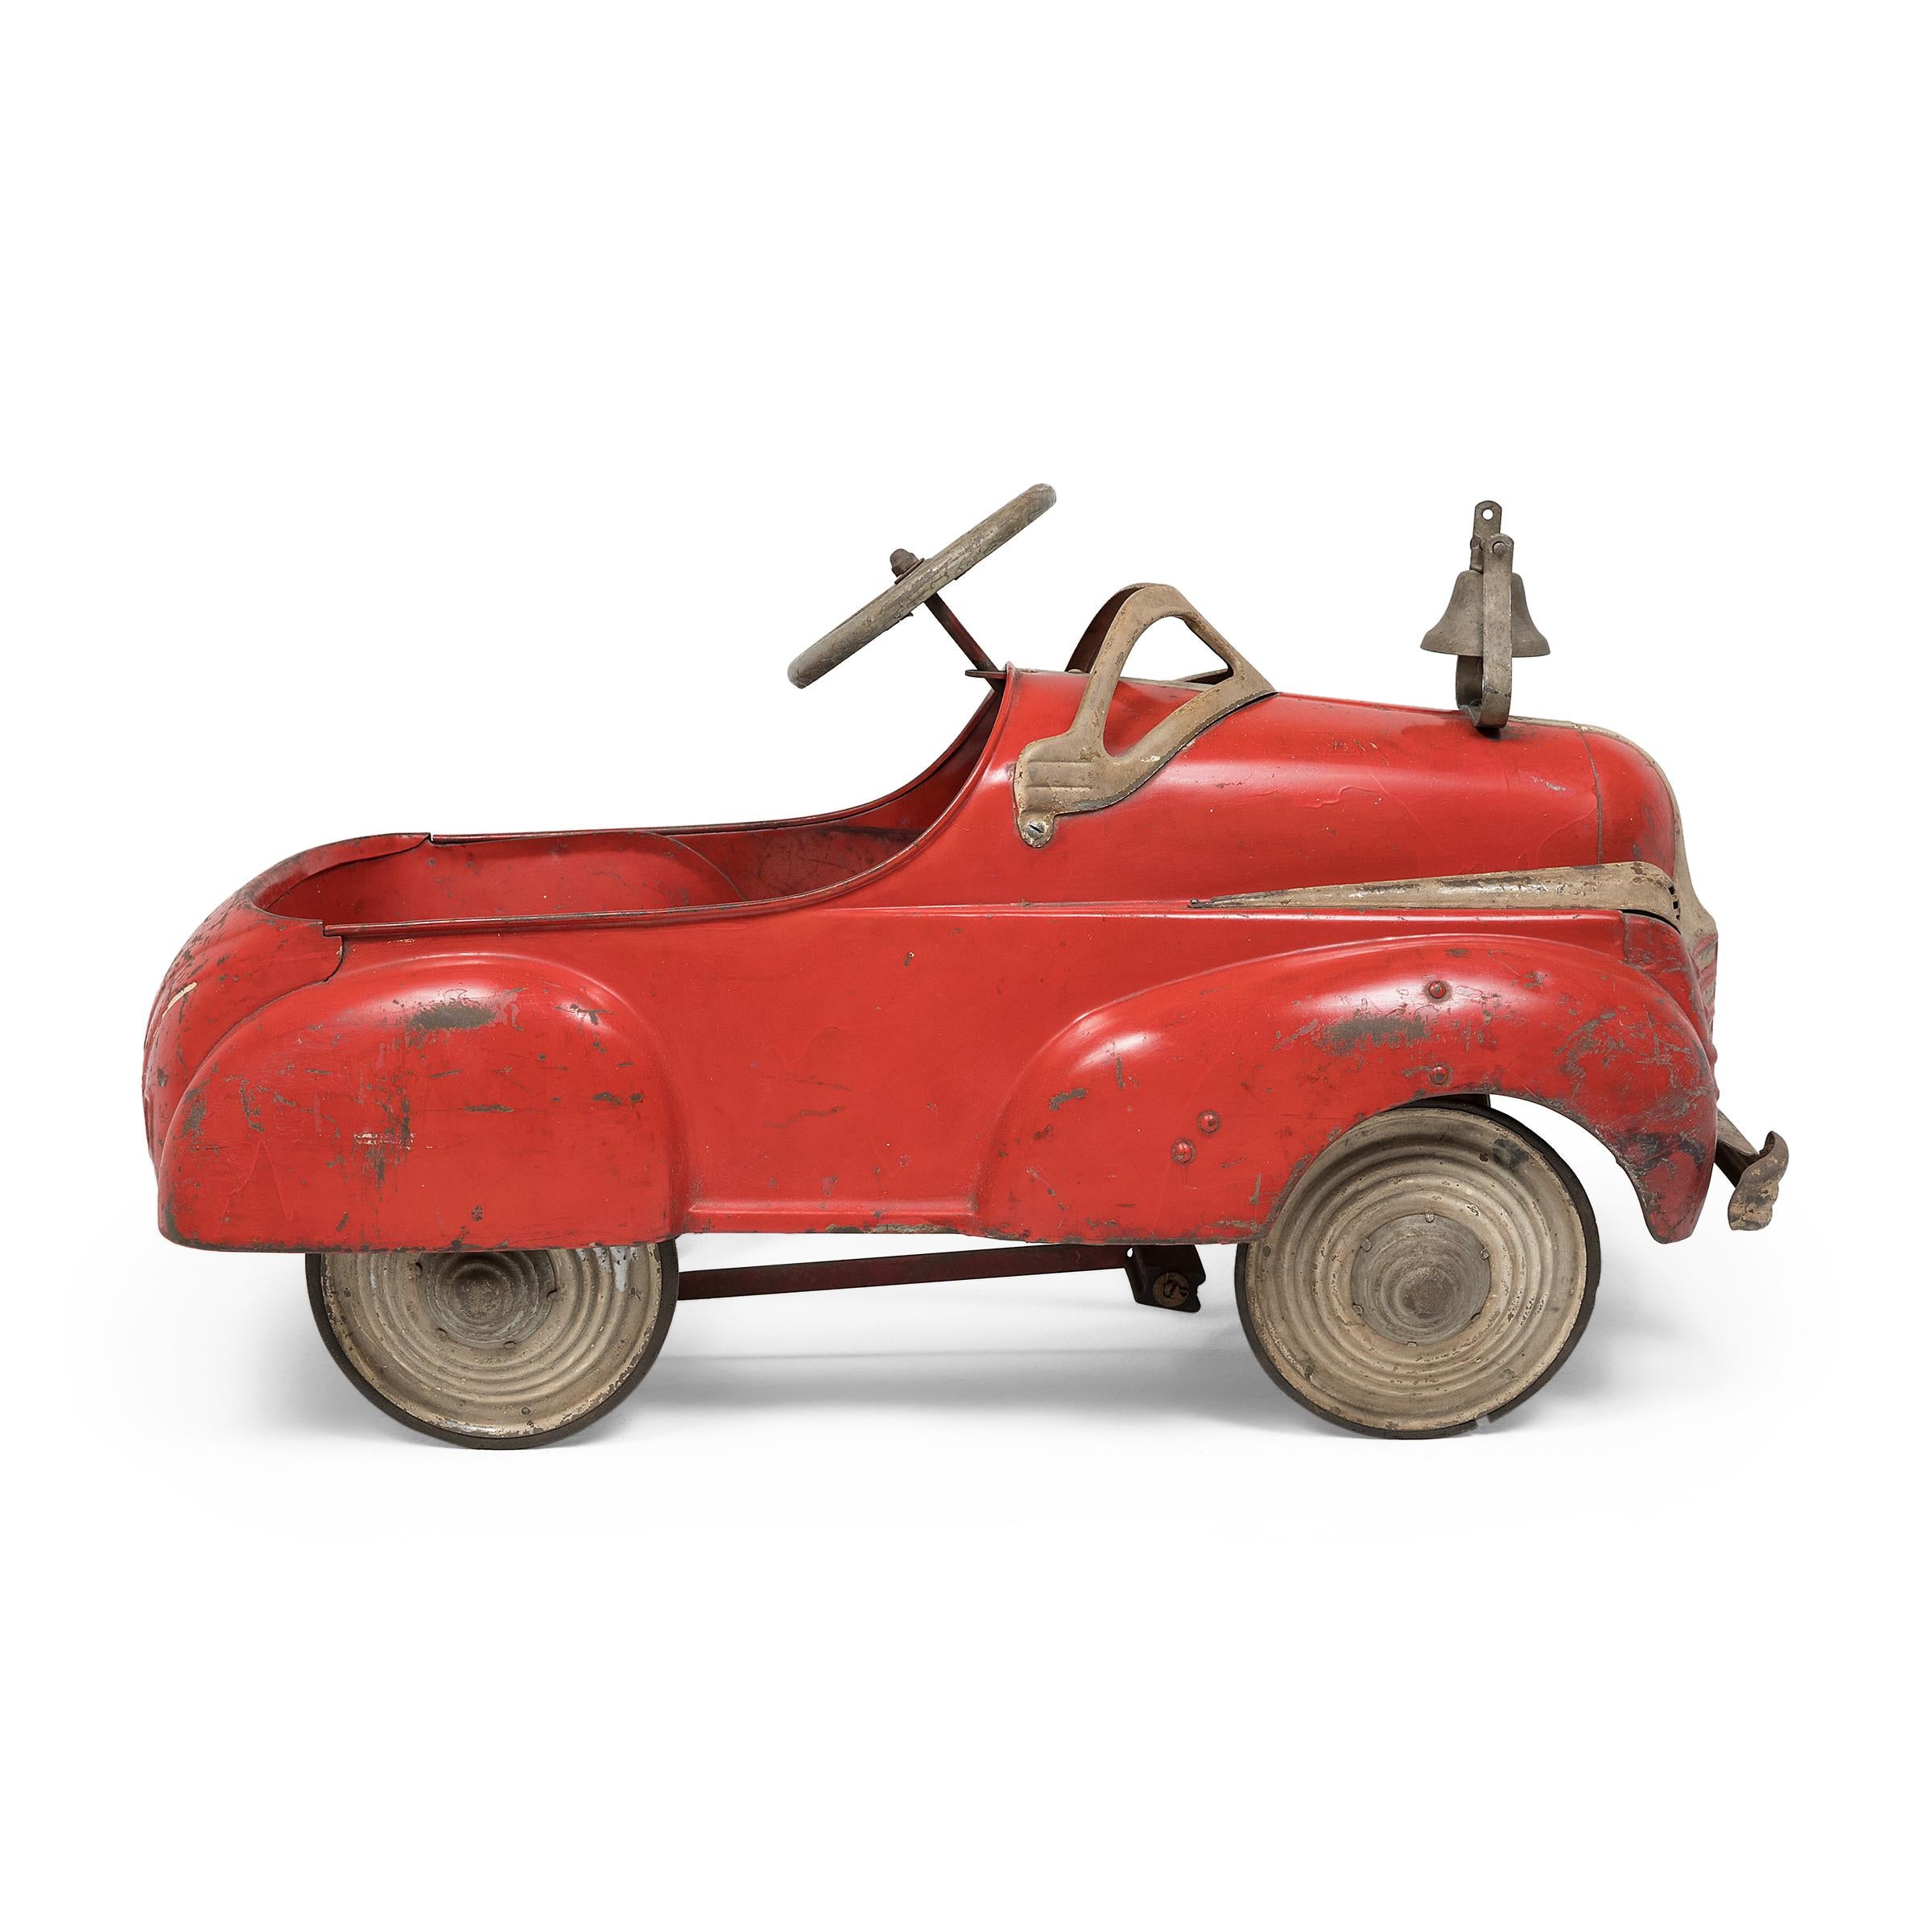 Vibrant, sleek and full of character, this vintage pedal car was once the prized possession of children all across America. A popular toy since the late 19th century, pedal cars experienced a massive boom in the postwar era, becoming a staple